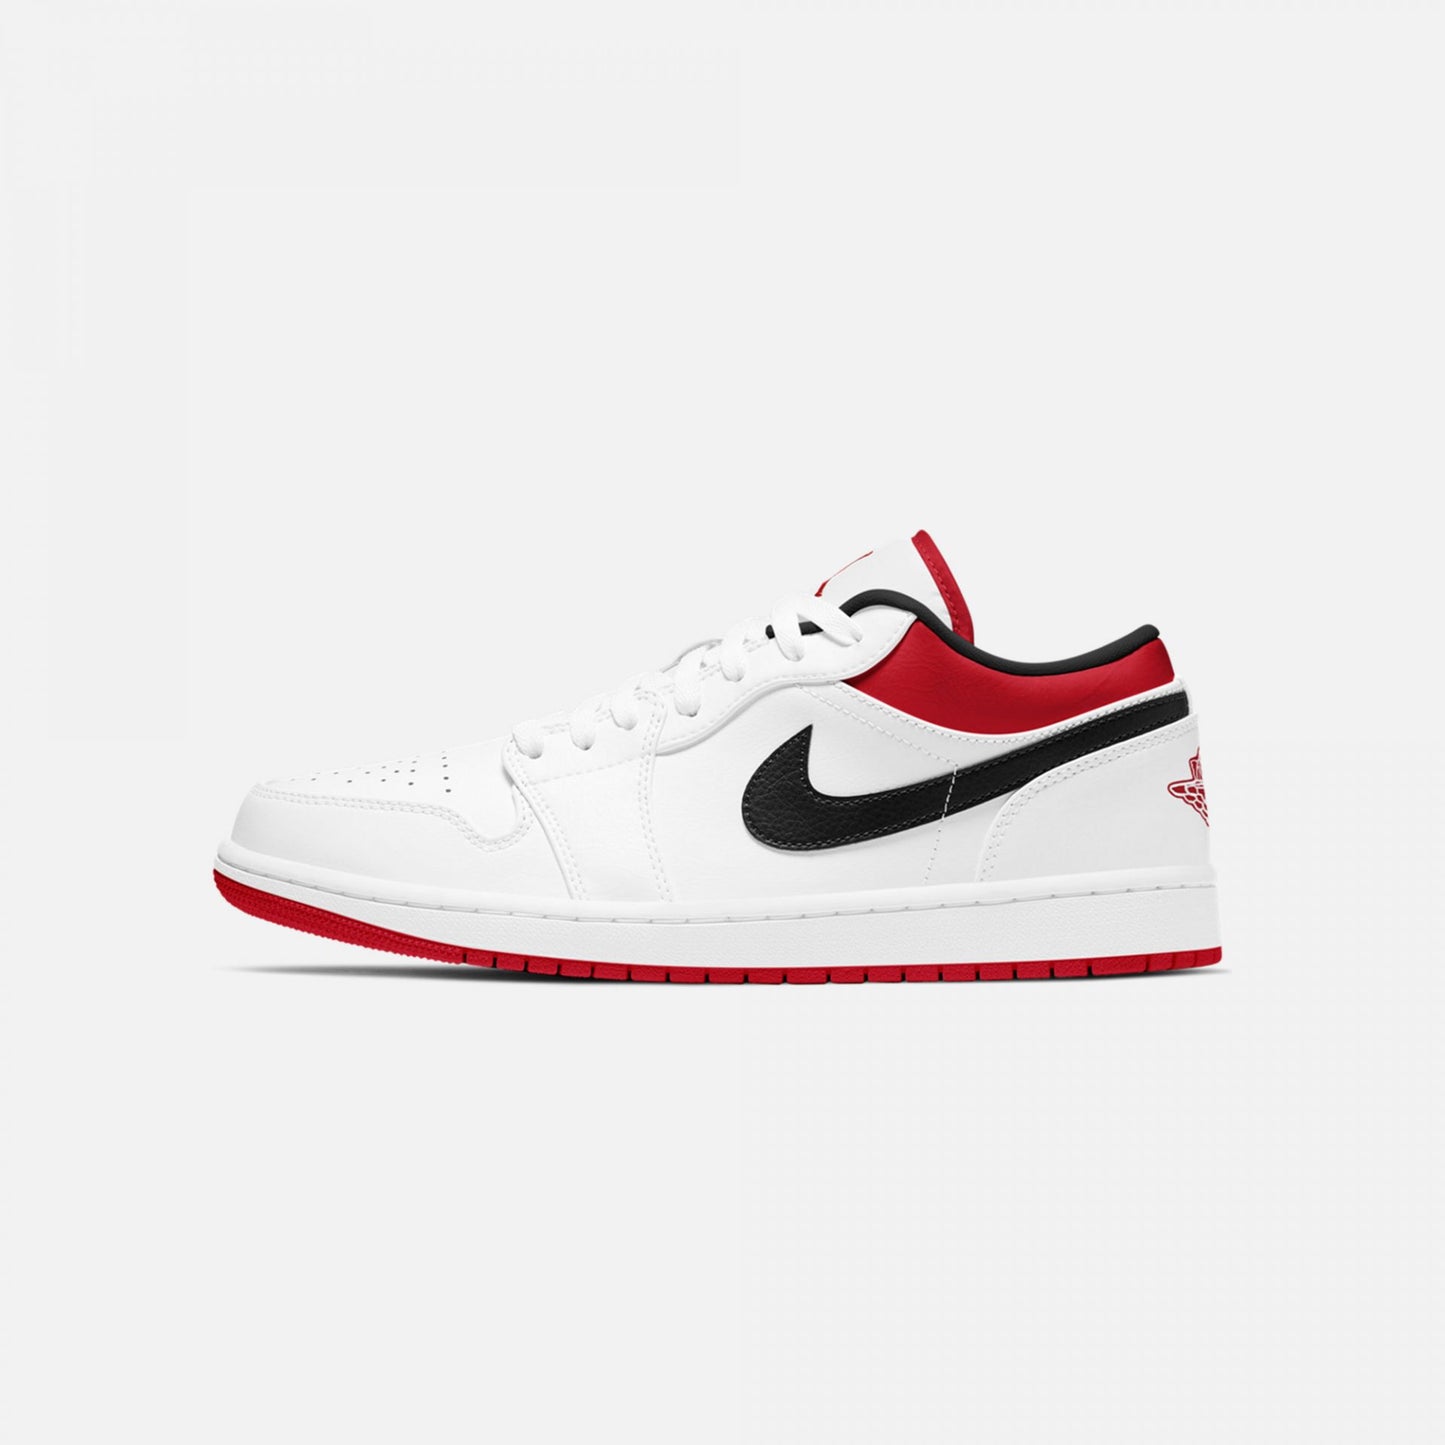 Air Jordan 1 Low White University Red - Shop Streetwear, Sneakers, Slippers and Gifts online | Malaysia - The Factory KL